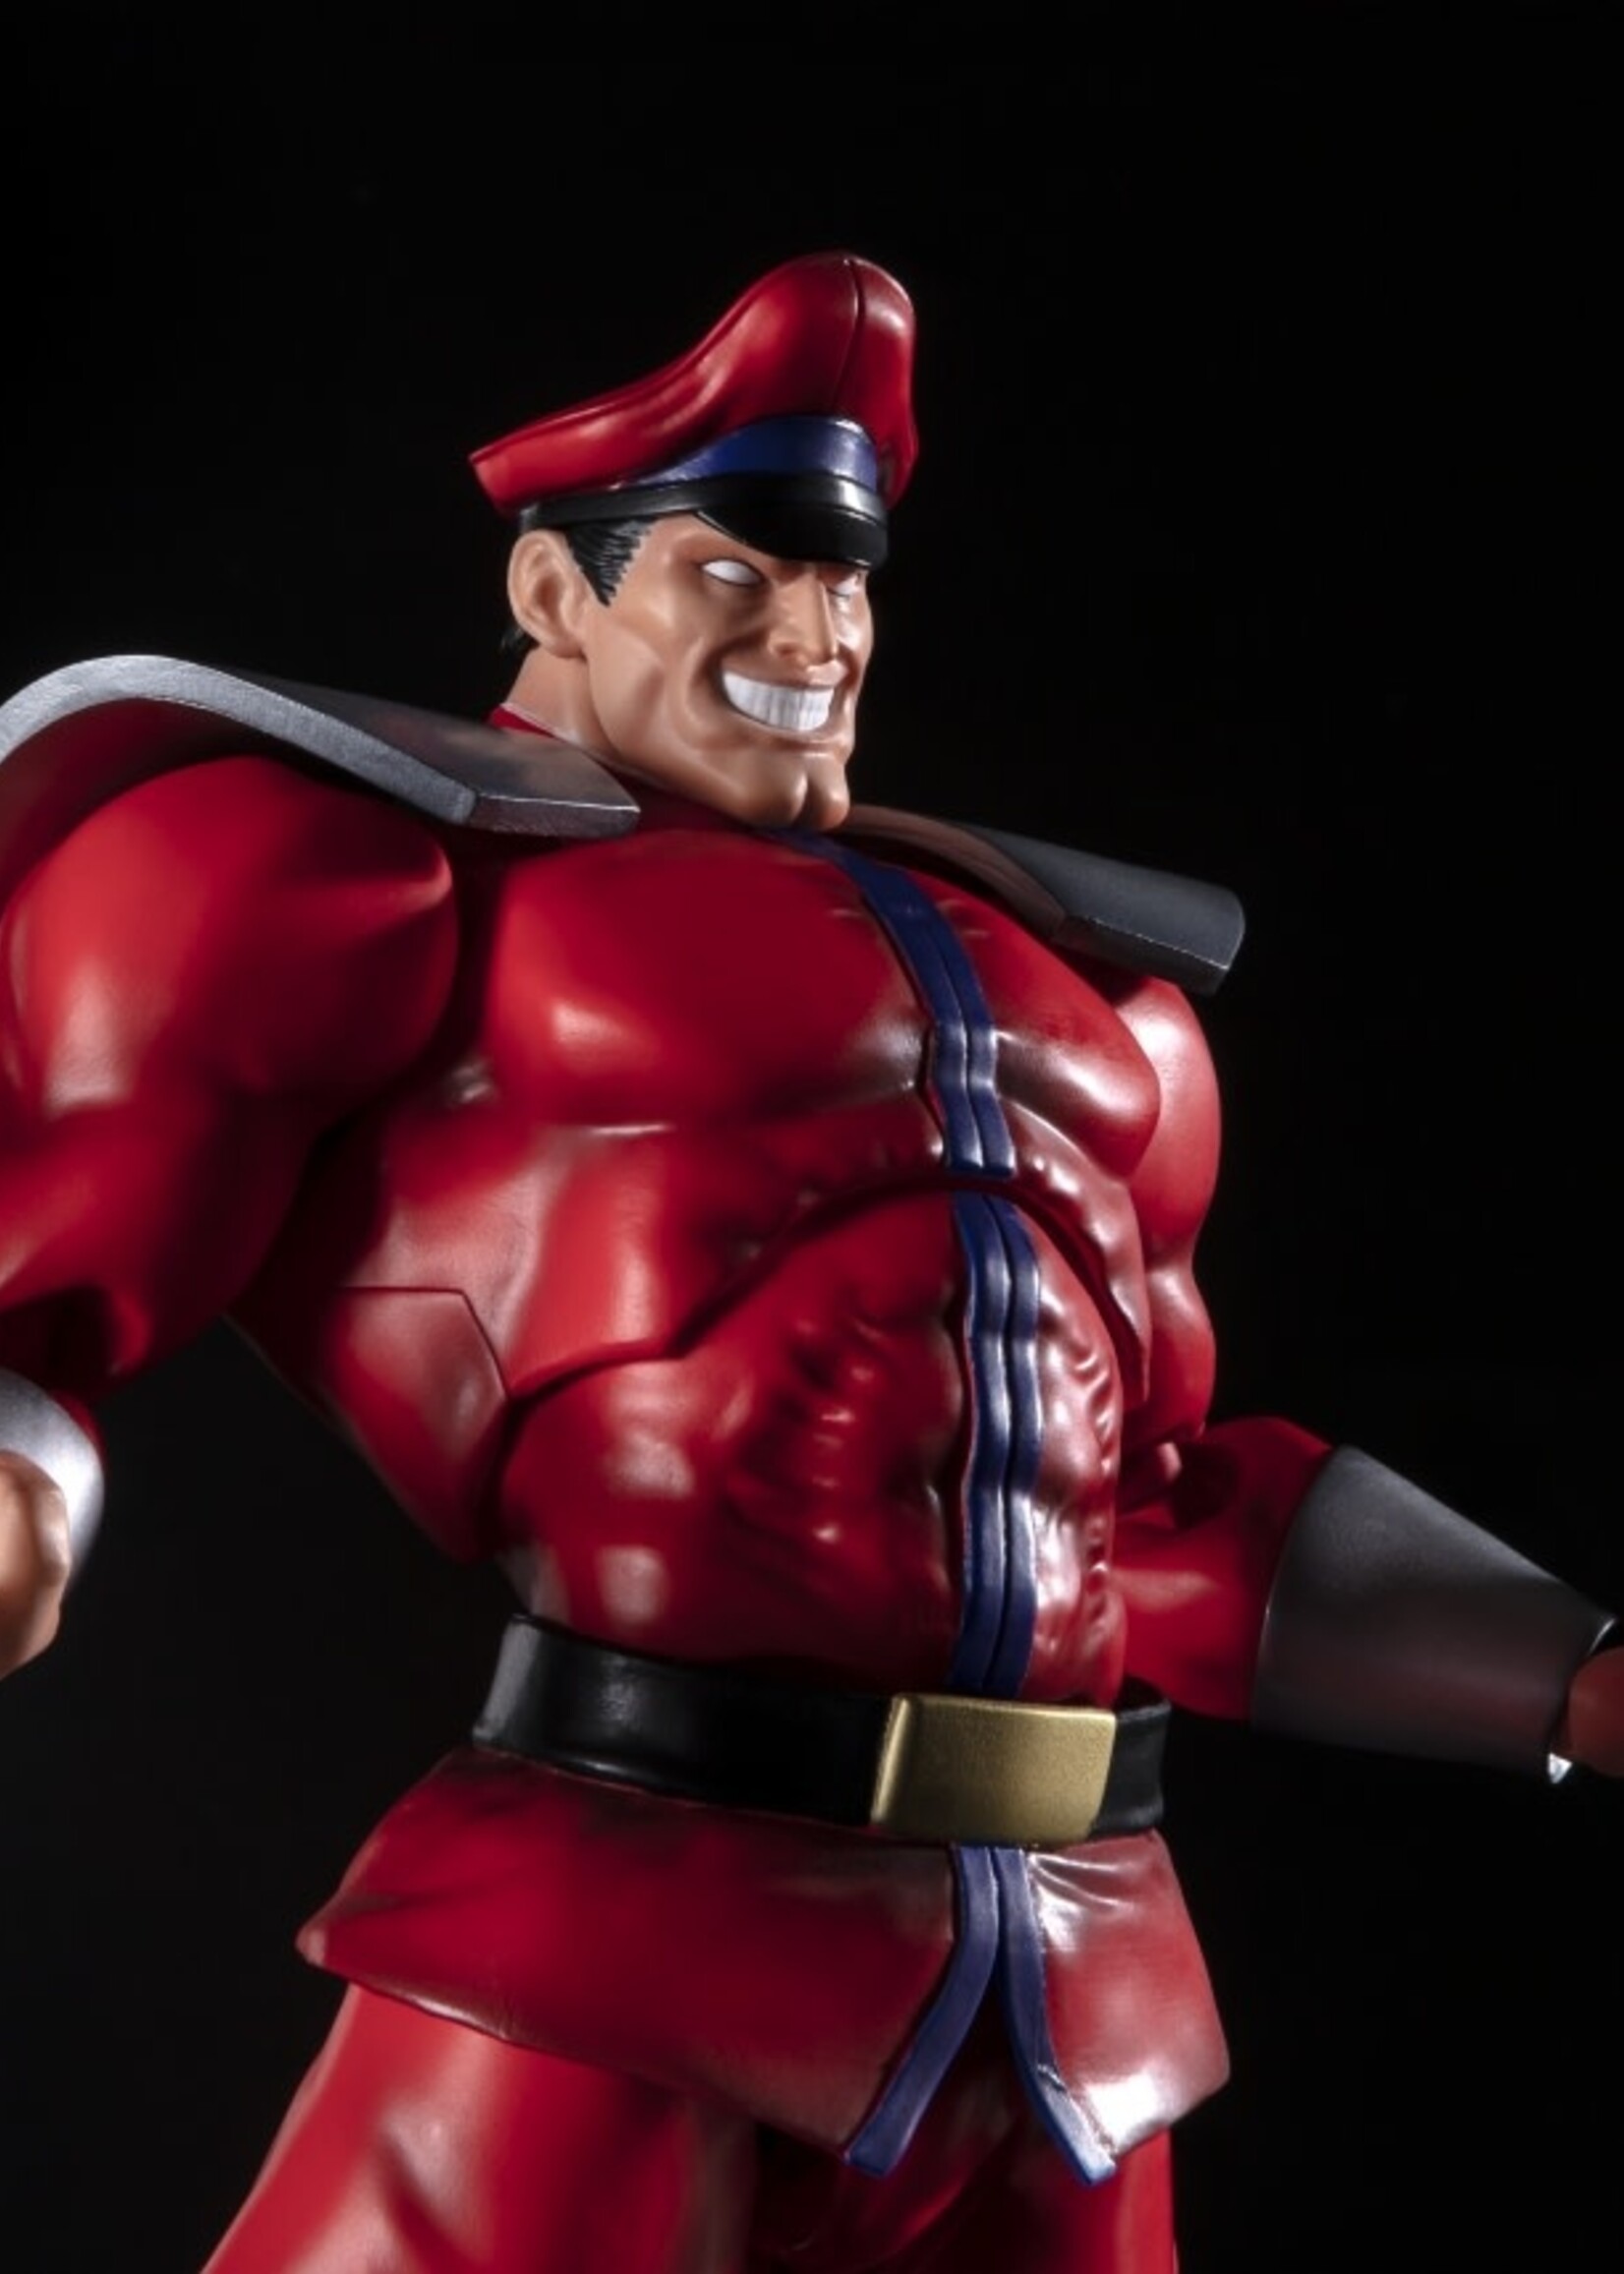 S.H. Figuarts Street Fighter Vega Figure Video Review And Images